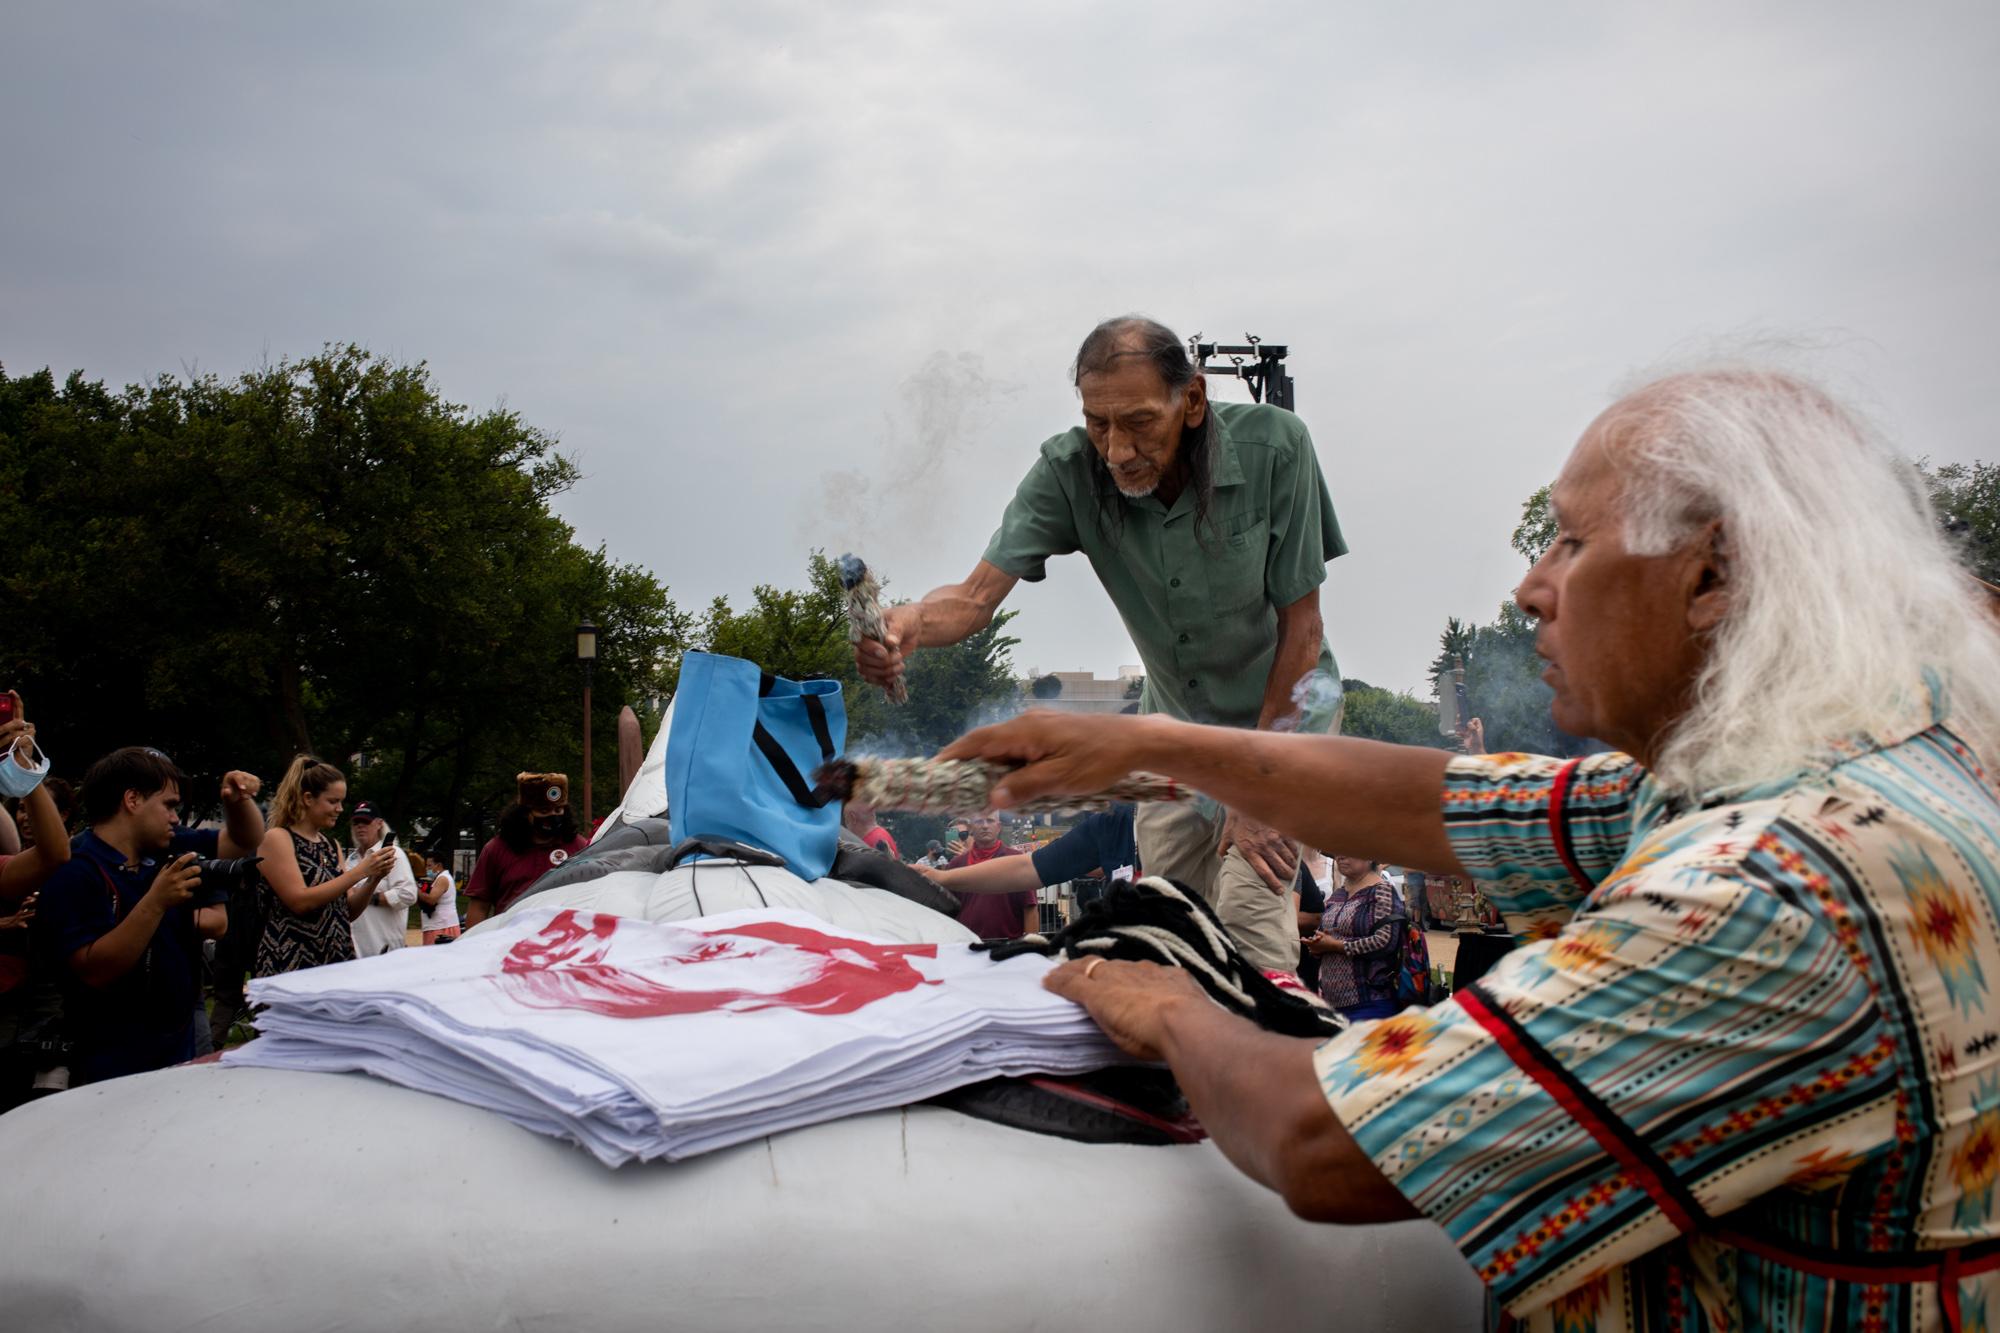 (Left) Elder Nathan Phillips of the Omaha Nation and Alan Salazar of Fernandeno Tataviam Band of Mission Indians bless the hand carved totem pole in the National Mall in Washington, D.C. Thursday, July 29, 2021